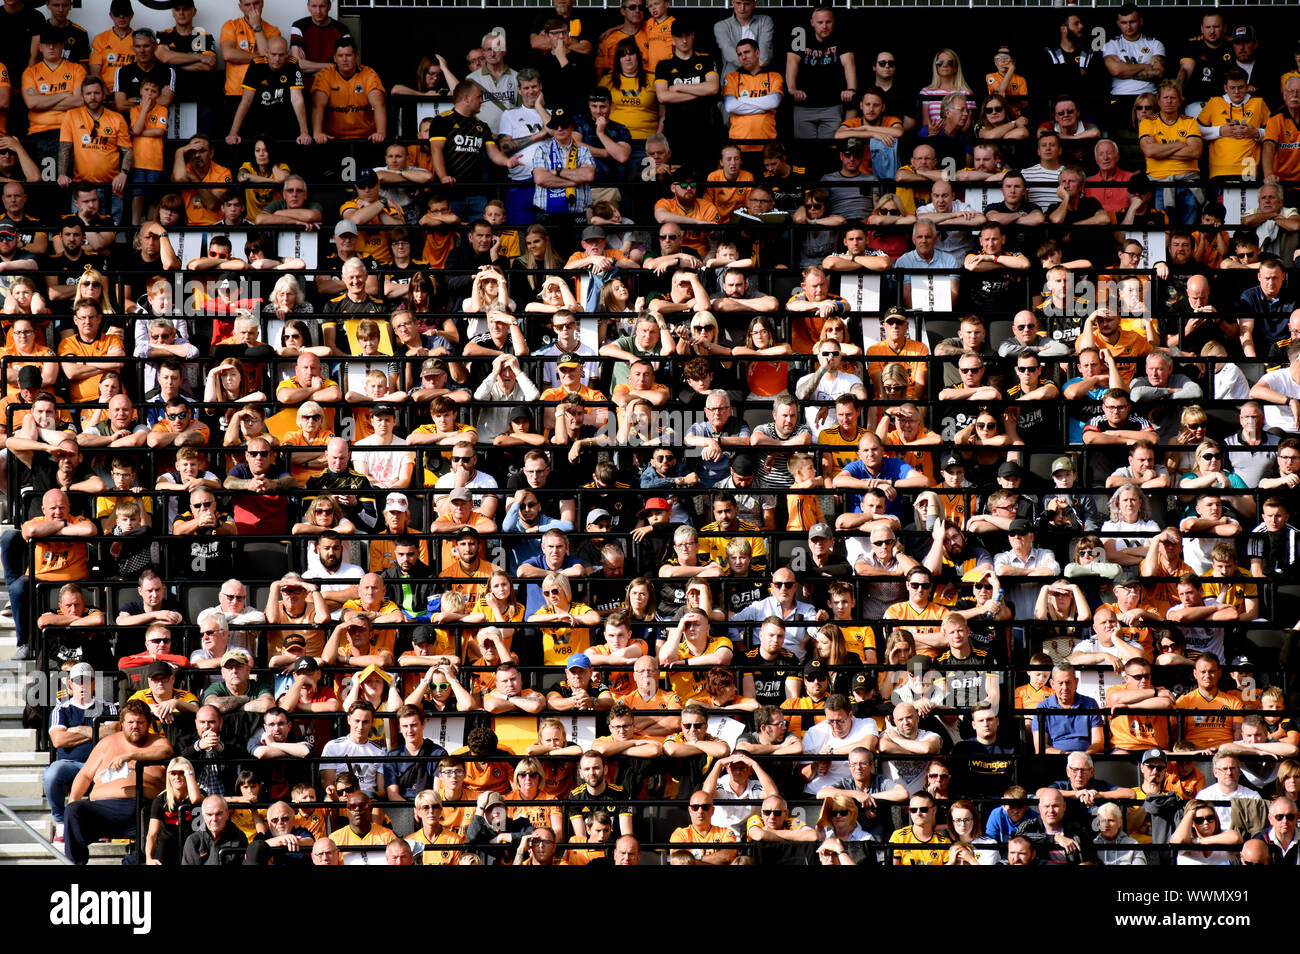 Football supporters using Safe standing seats at Molineux football stadium home of Wolverhampton Wanderers Football Club Stock Photo